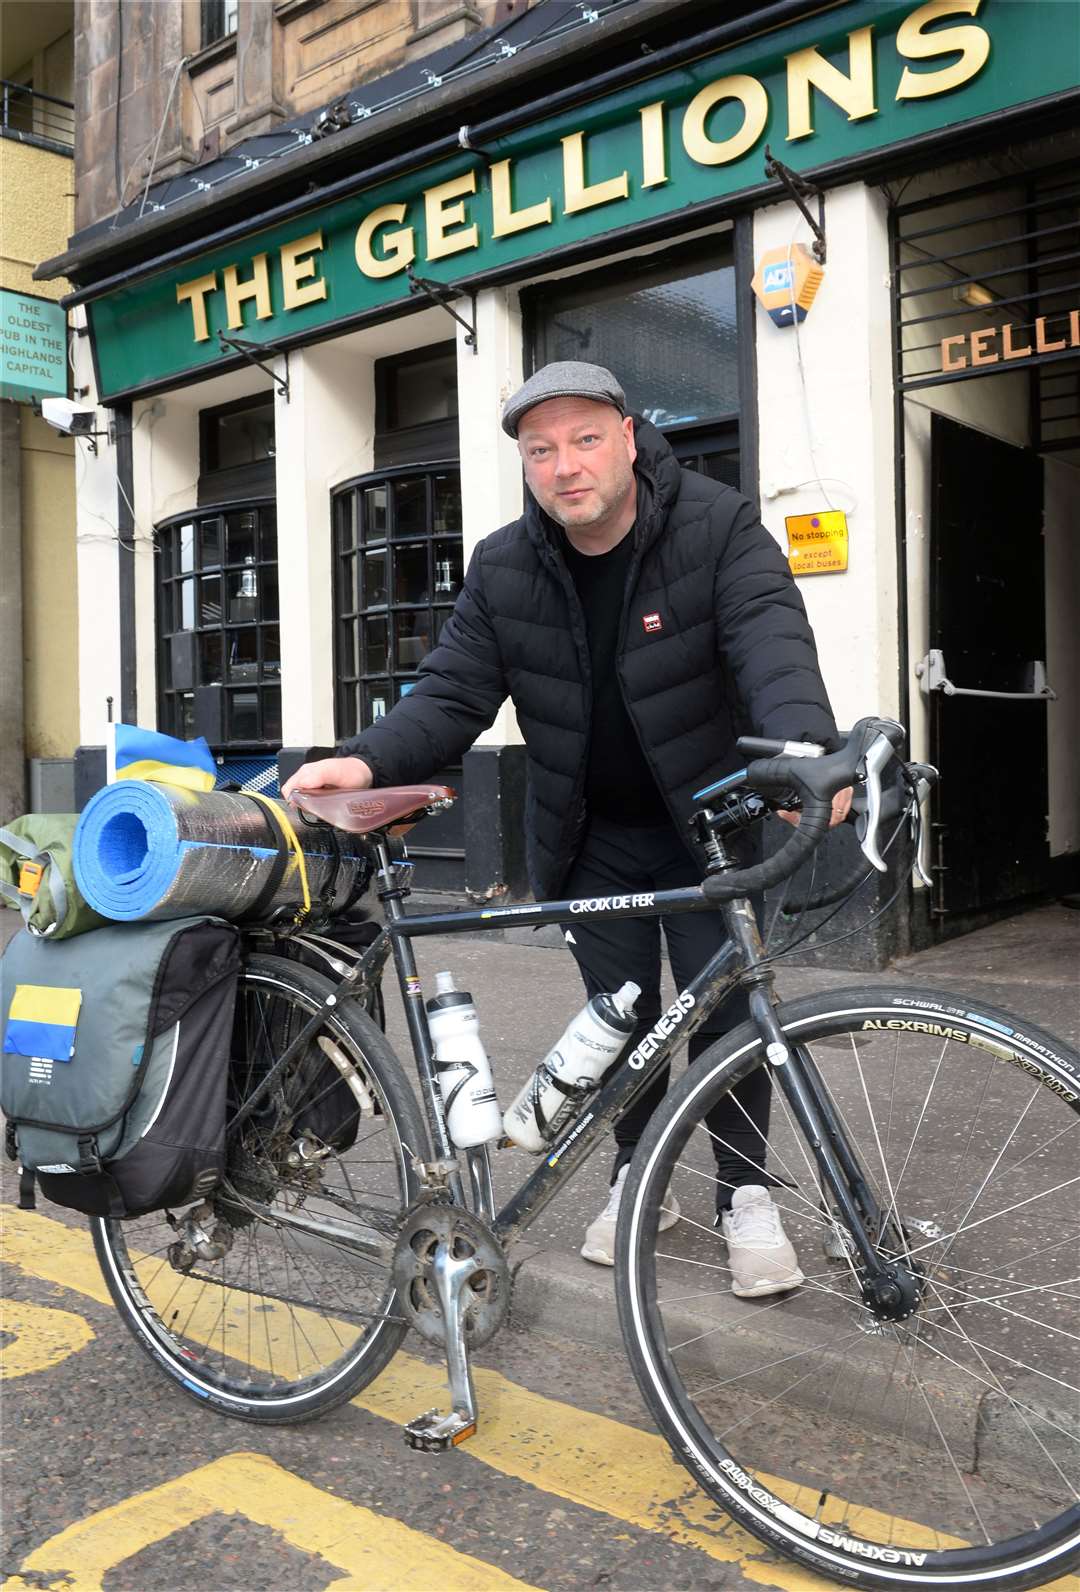 Alasdair Fraser has set off from Gdansk in Poland and is heading towards The Gellions in Inverness in aid of Urkraine. Picture: Gary Anthony